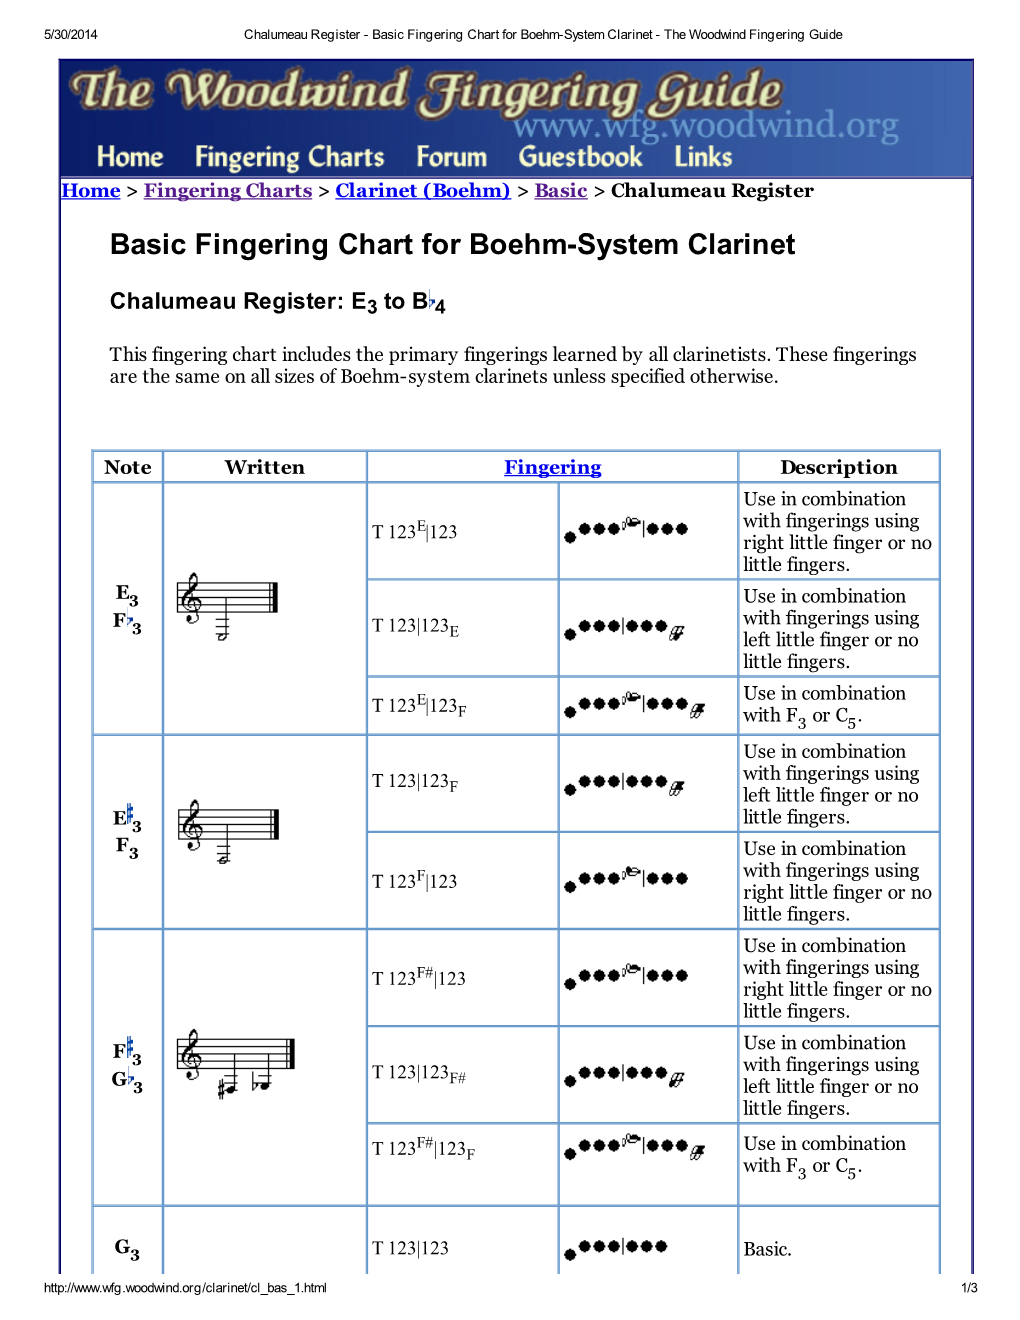 Basic Fingering Chart for Boehm-System Clarinet - the Woodwind Fingering Guide